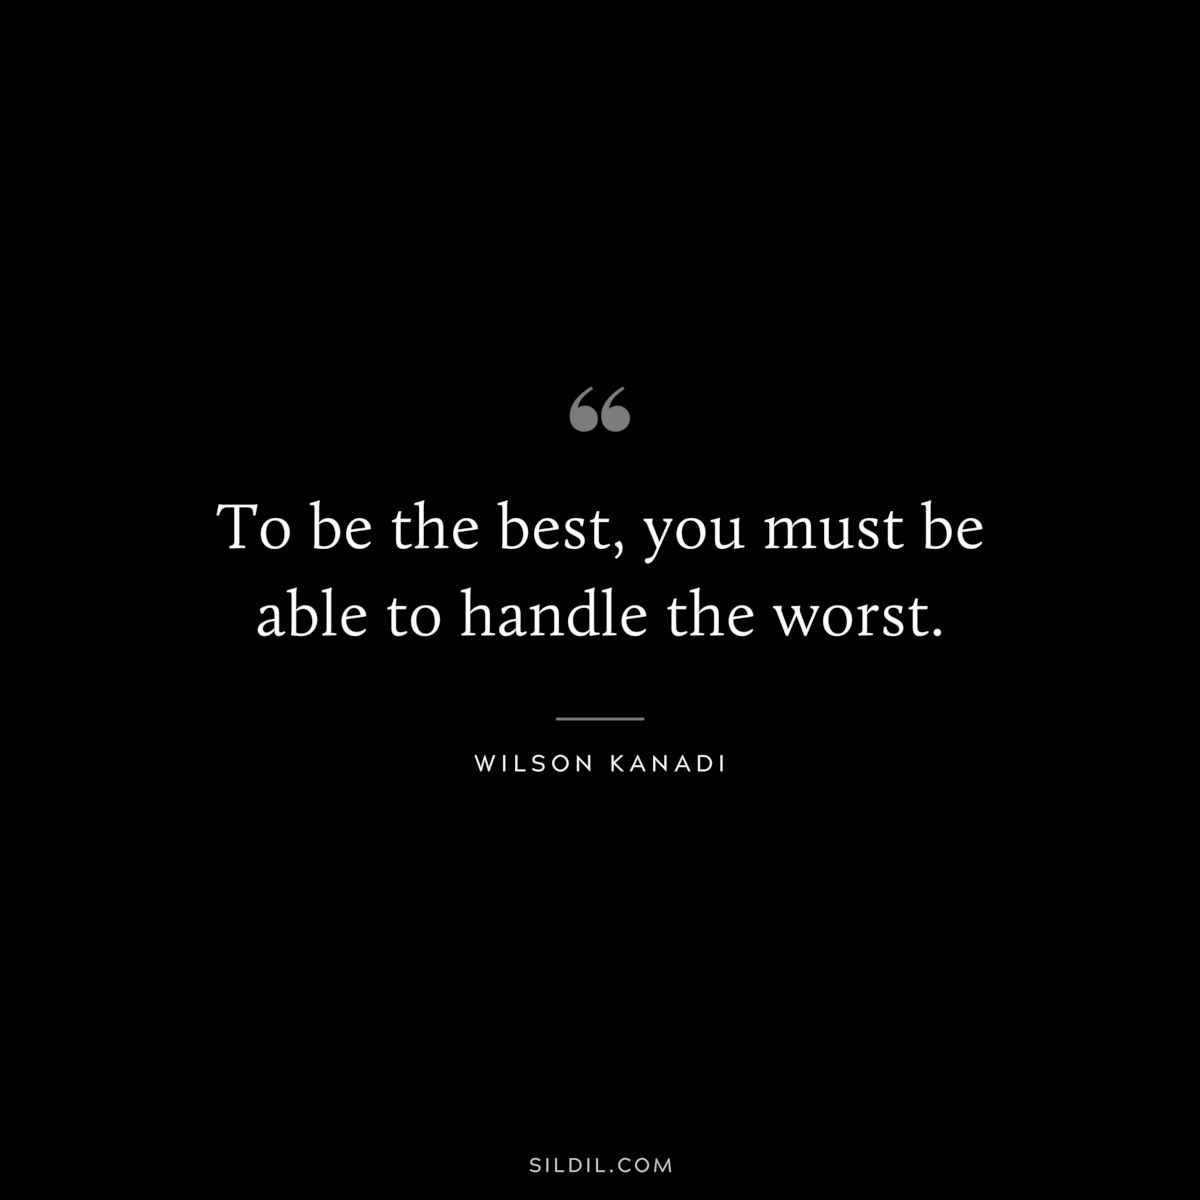 To be the best, you must be able to handle the worst. ― Wilson Kanadi